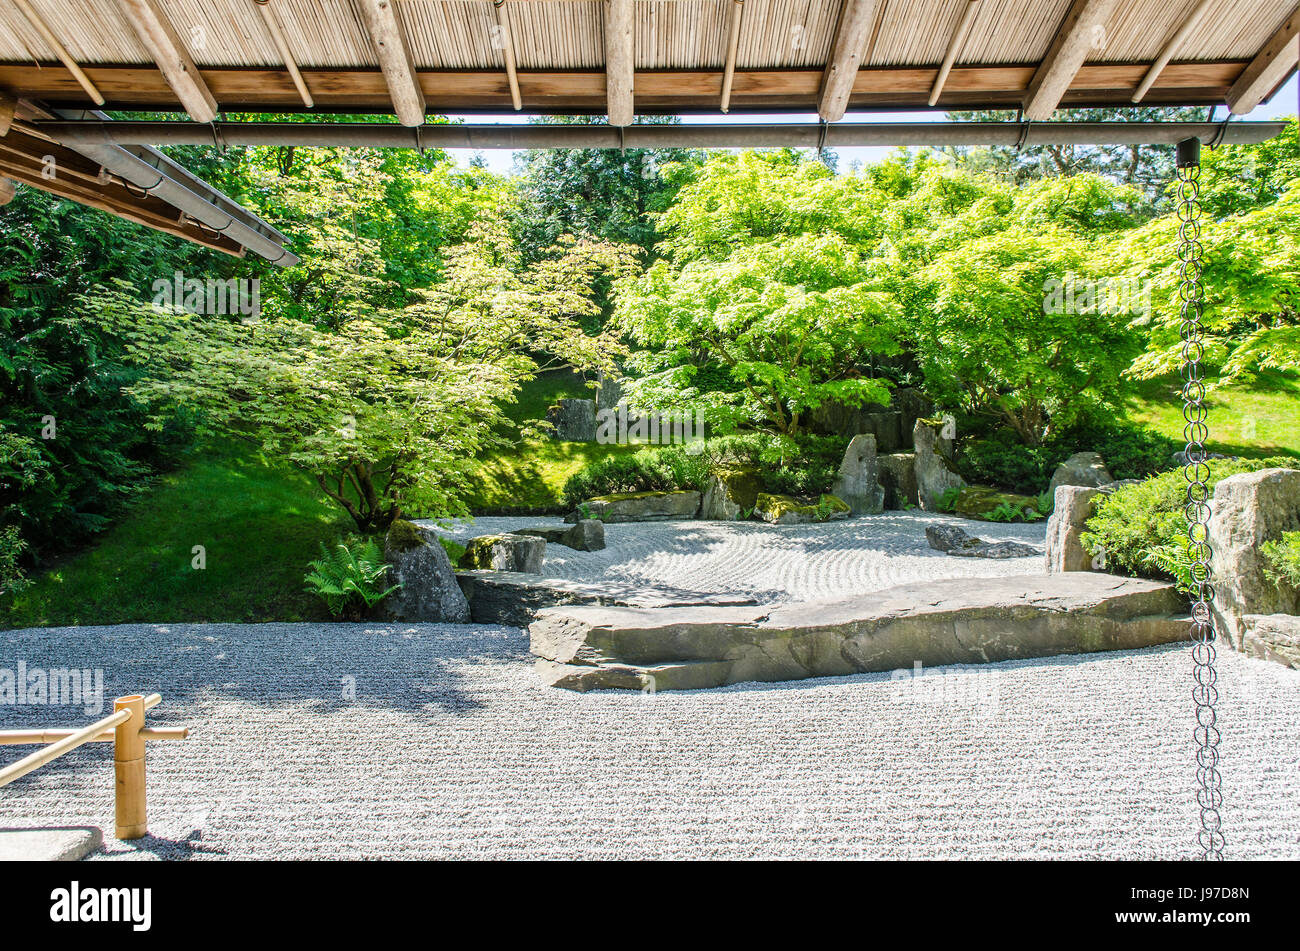 The Zen Garden As A Japanese Place Background, Zen Gardens Picture, Zen,  Garden Background Image And Wallpaper for Free Download